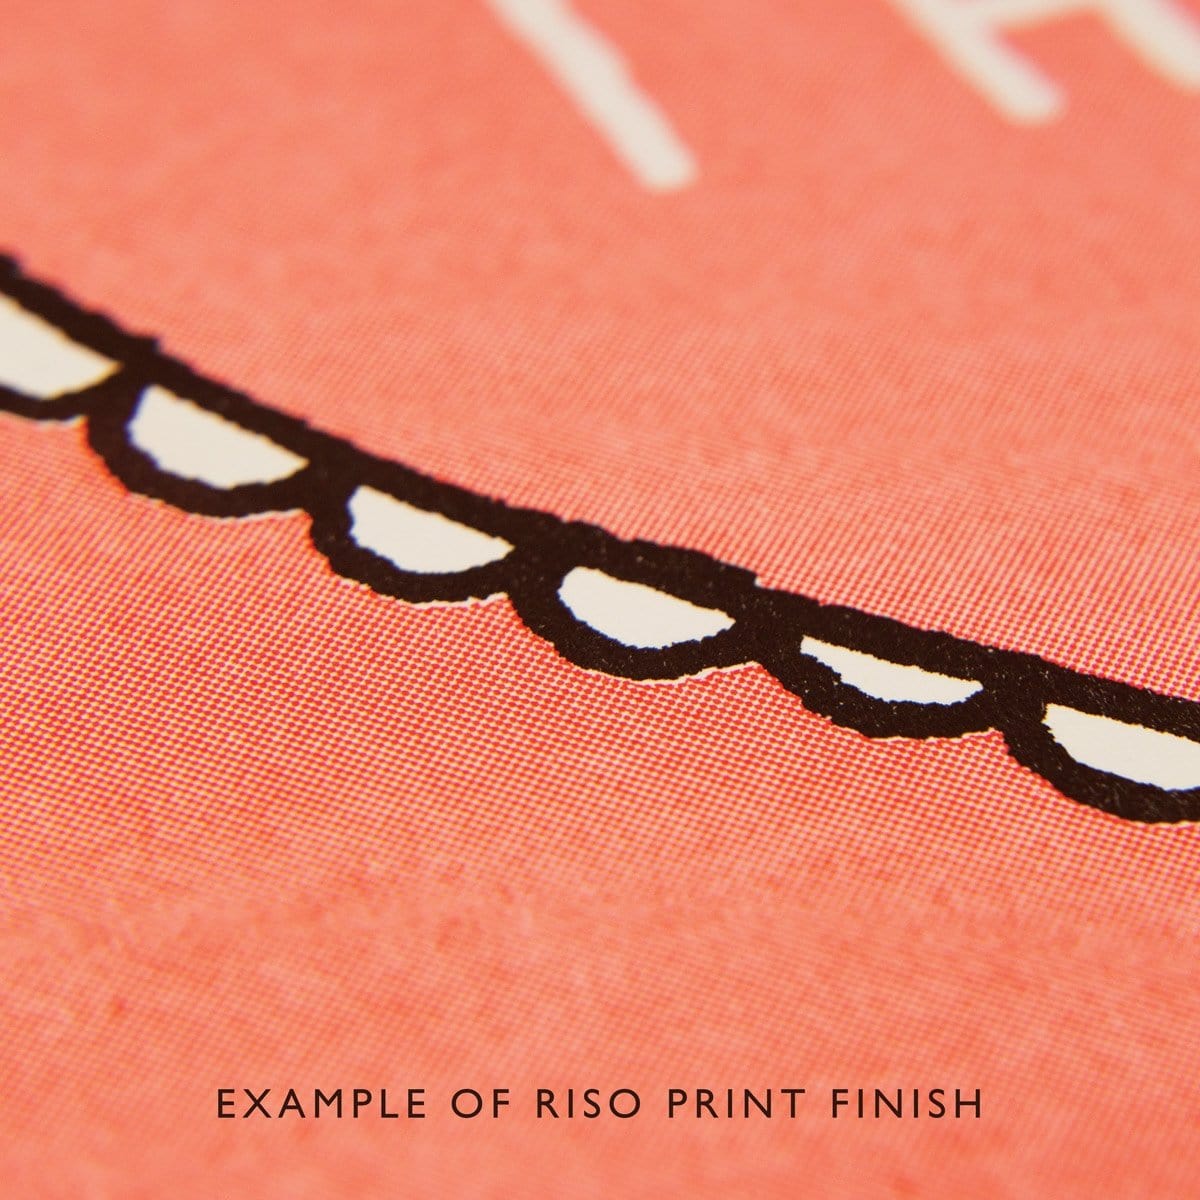 Peach coloured close up art print with black and white detailing